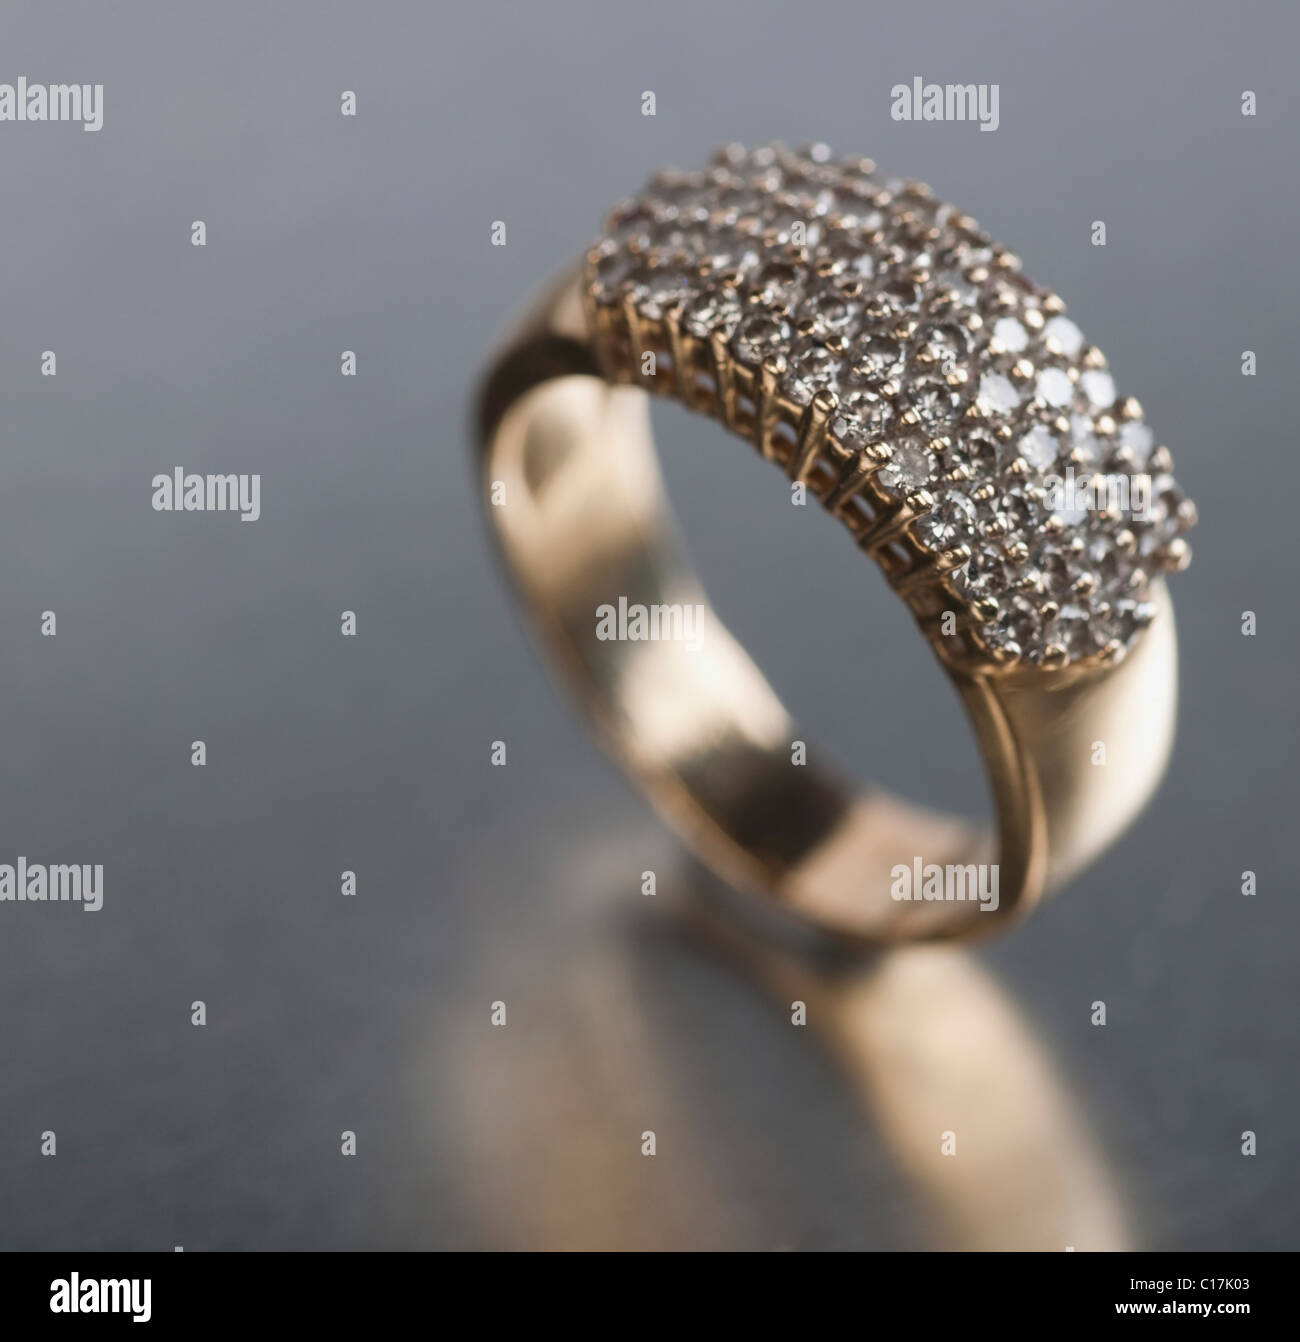 Close-up of a diamond ring Banque D'Images